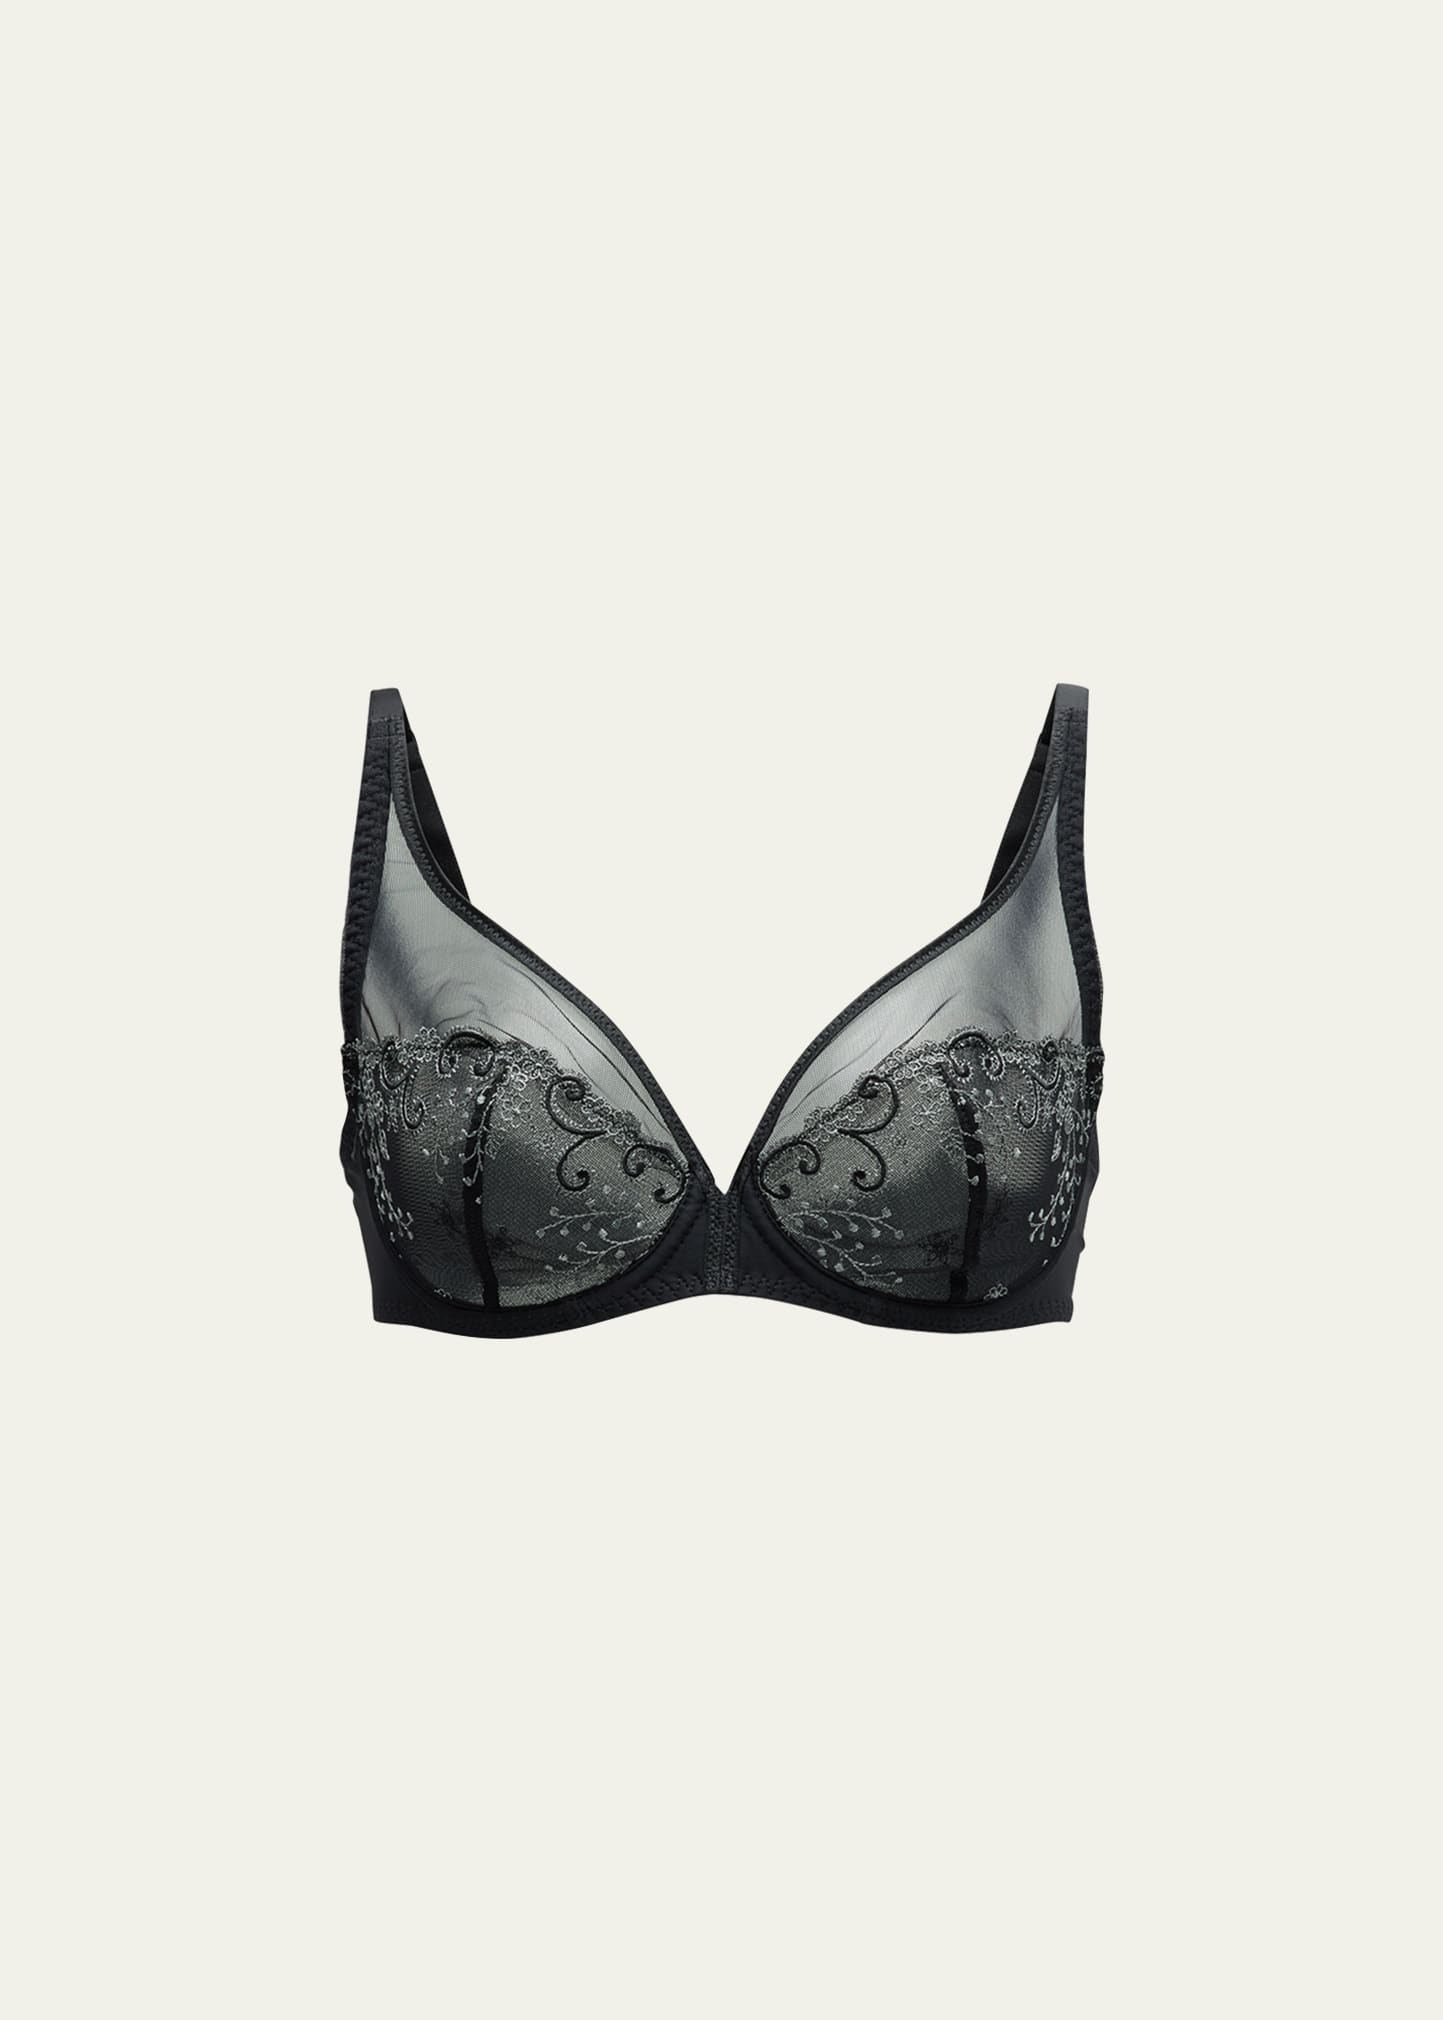 Delice Two-Part Full-Cup Sheer Plunge Bra